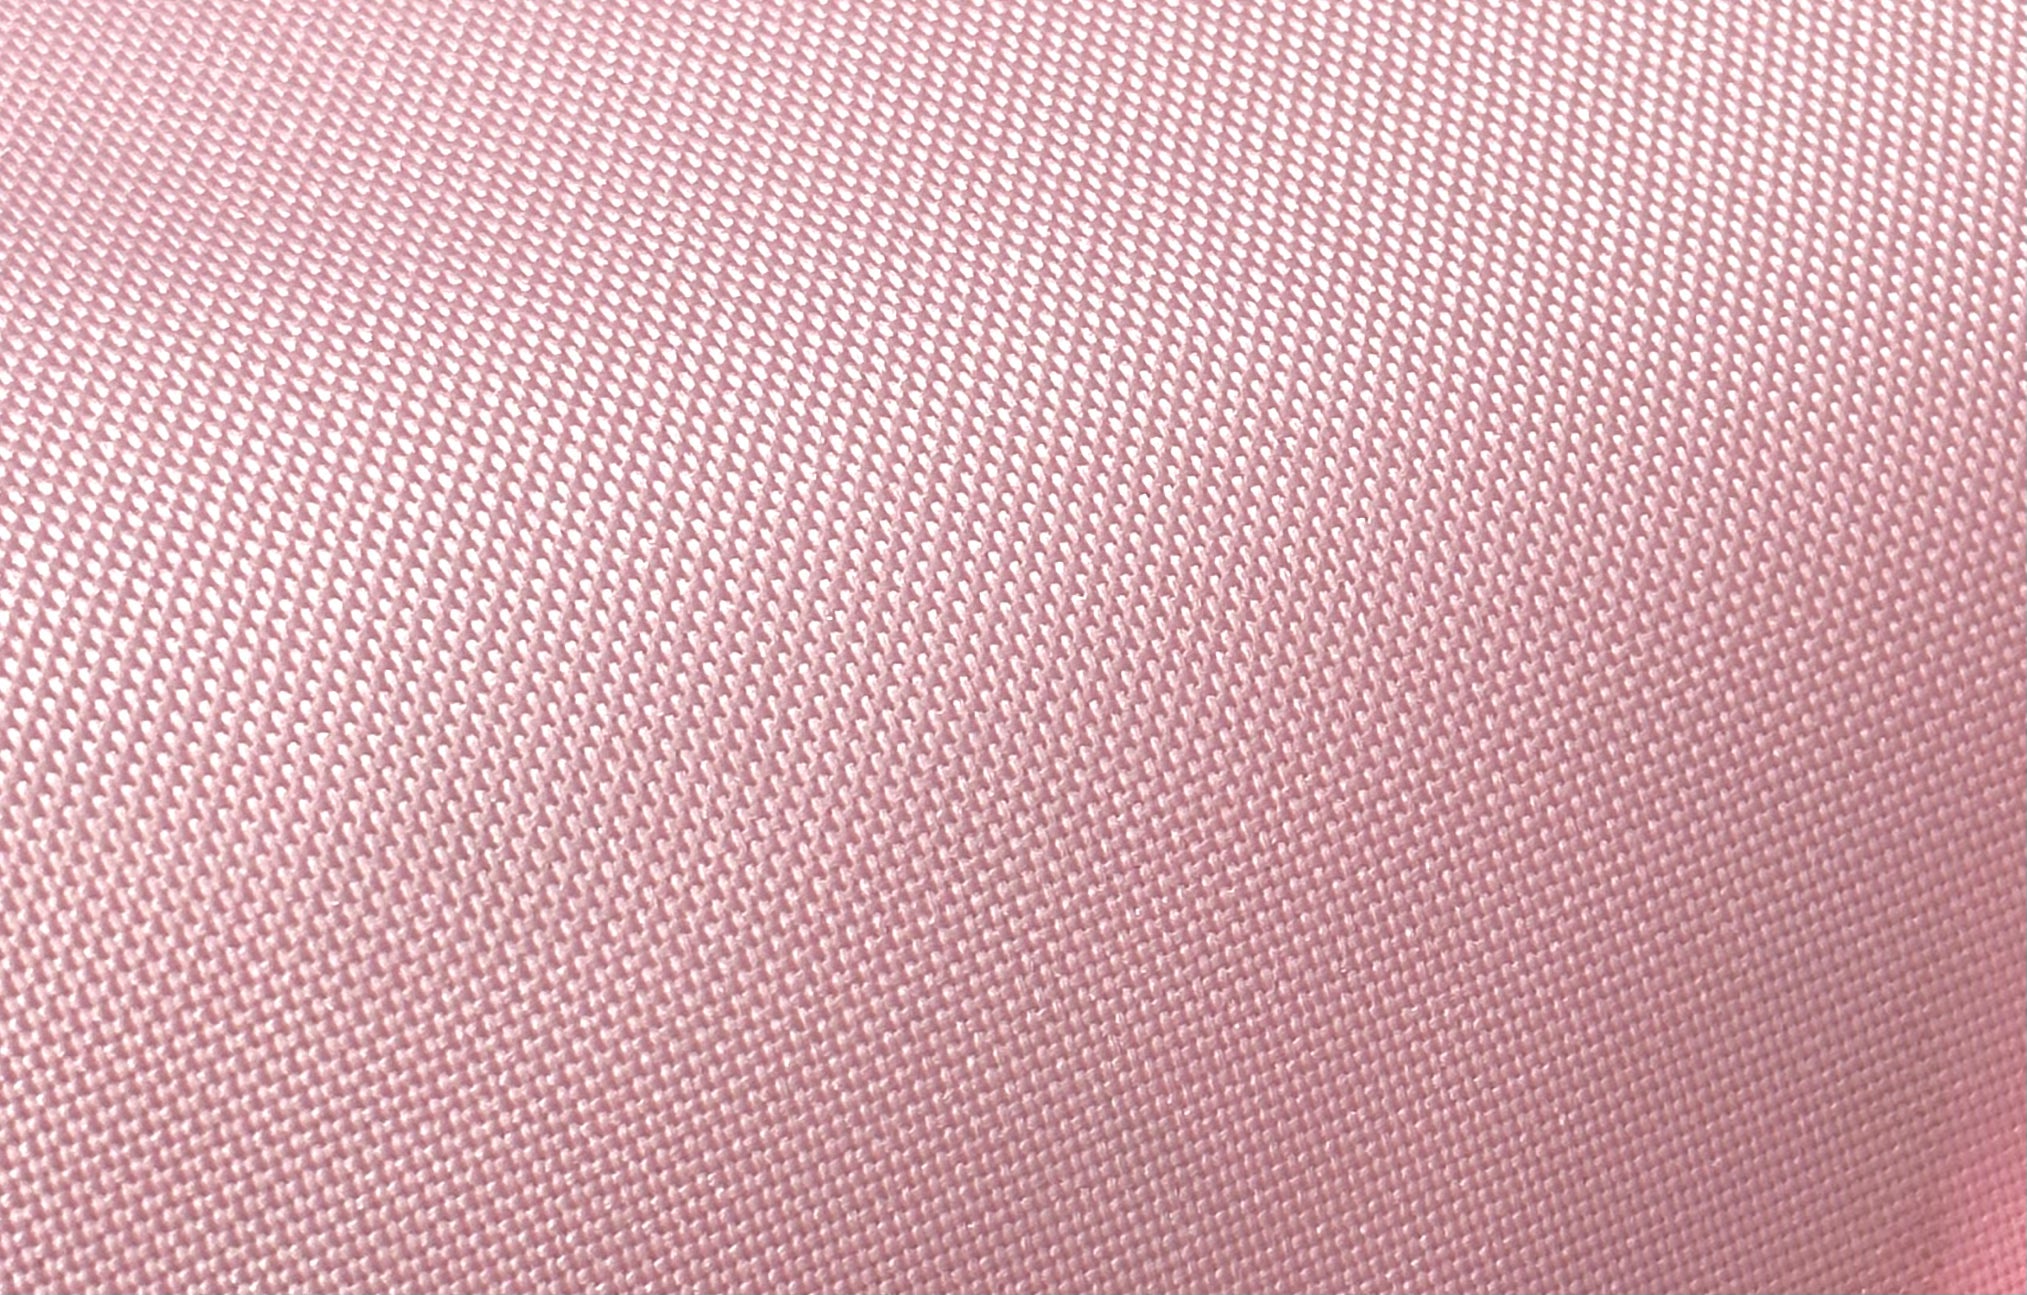 Light pink Water Resistant Canvas